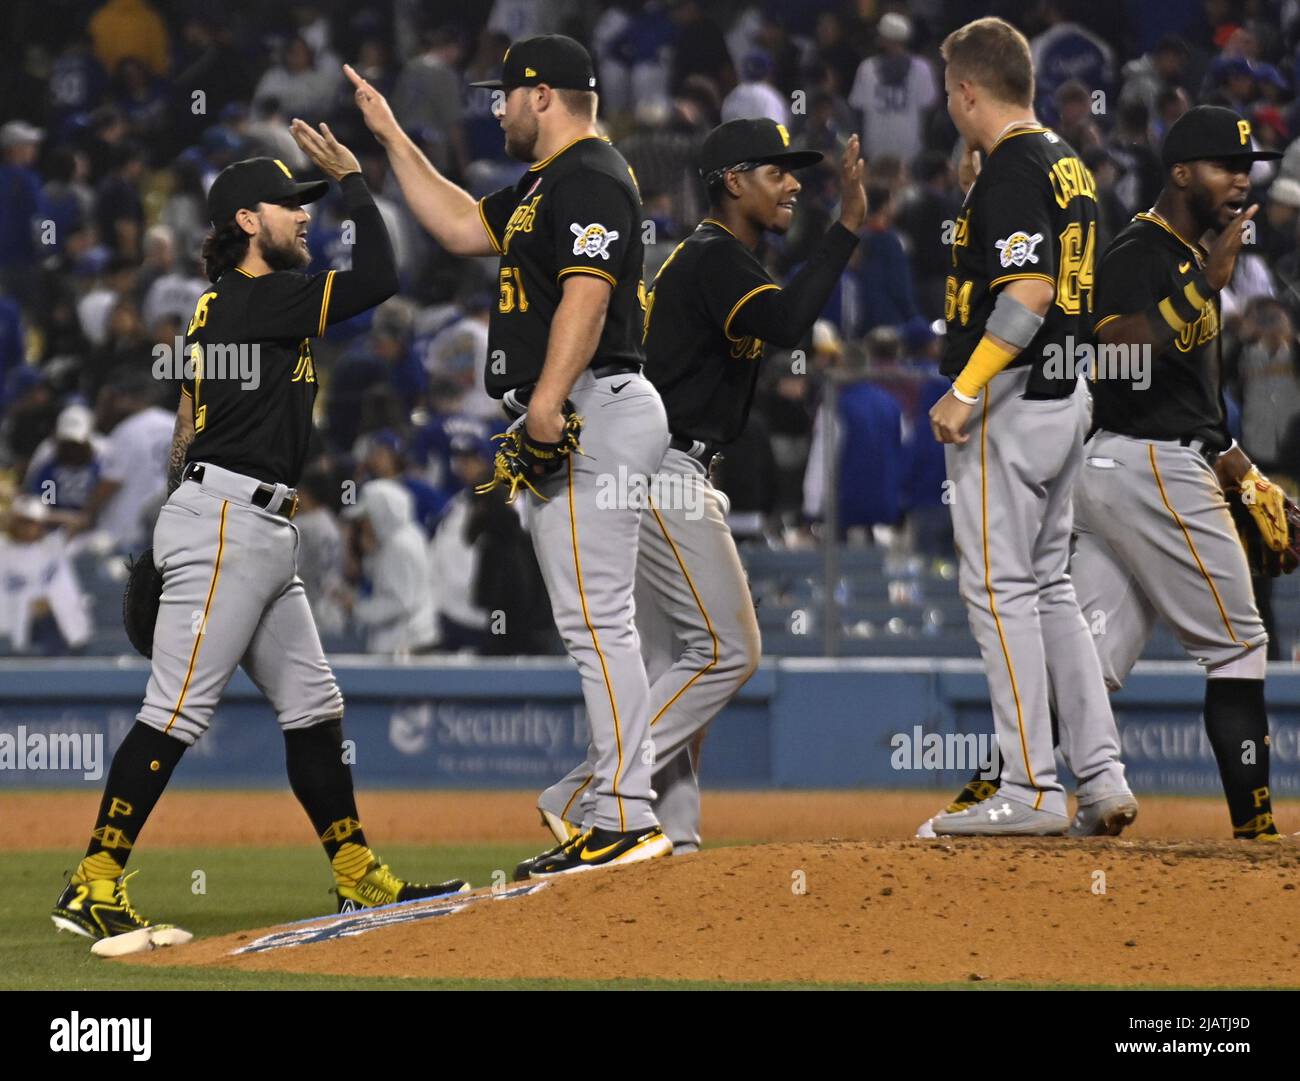 Pittsburgh Pirates relief pitcher David Bednar (51) high-fives Michael Chavis after defeating the Los Angeles Dodgers 6-5 at Dodger Stadium in Los Angeles on Monday, May 30, 2022.  Photo by Jim Ruymen/UPI Stock Photo